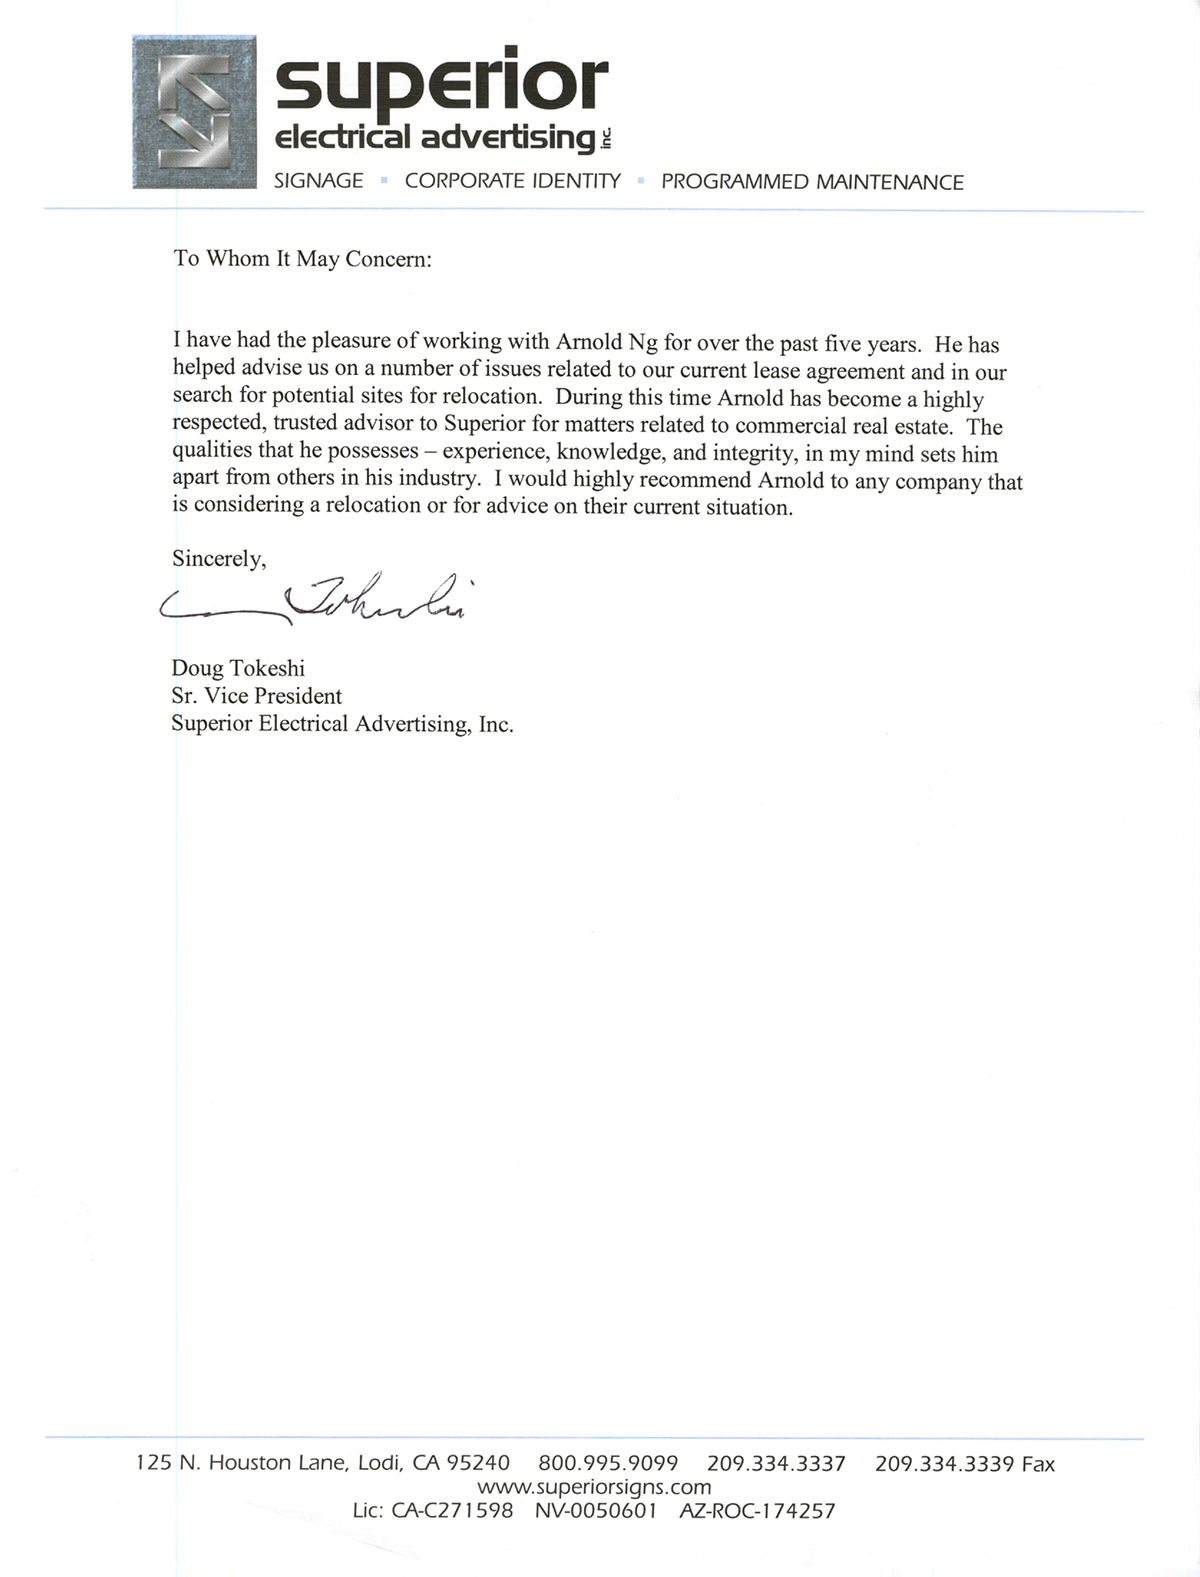 Thank you letter from Superior Electrical Advertising to Apex Commercial Real Estate